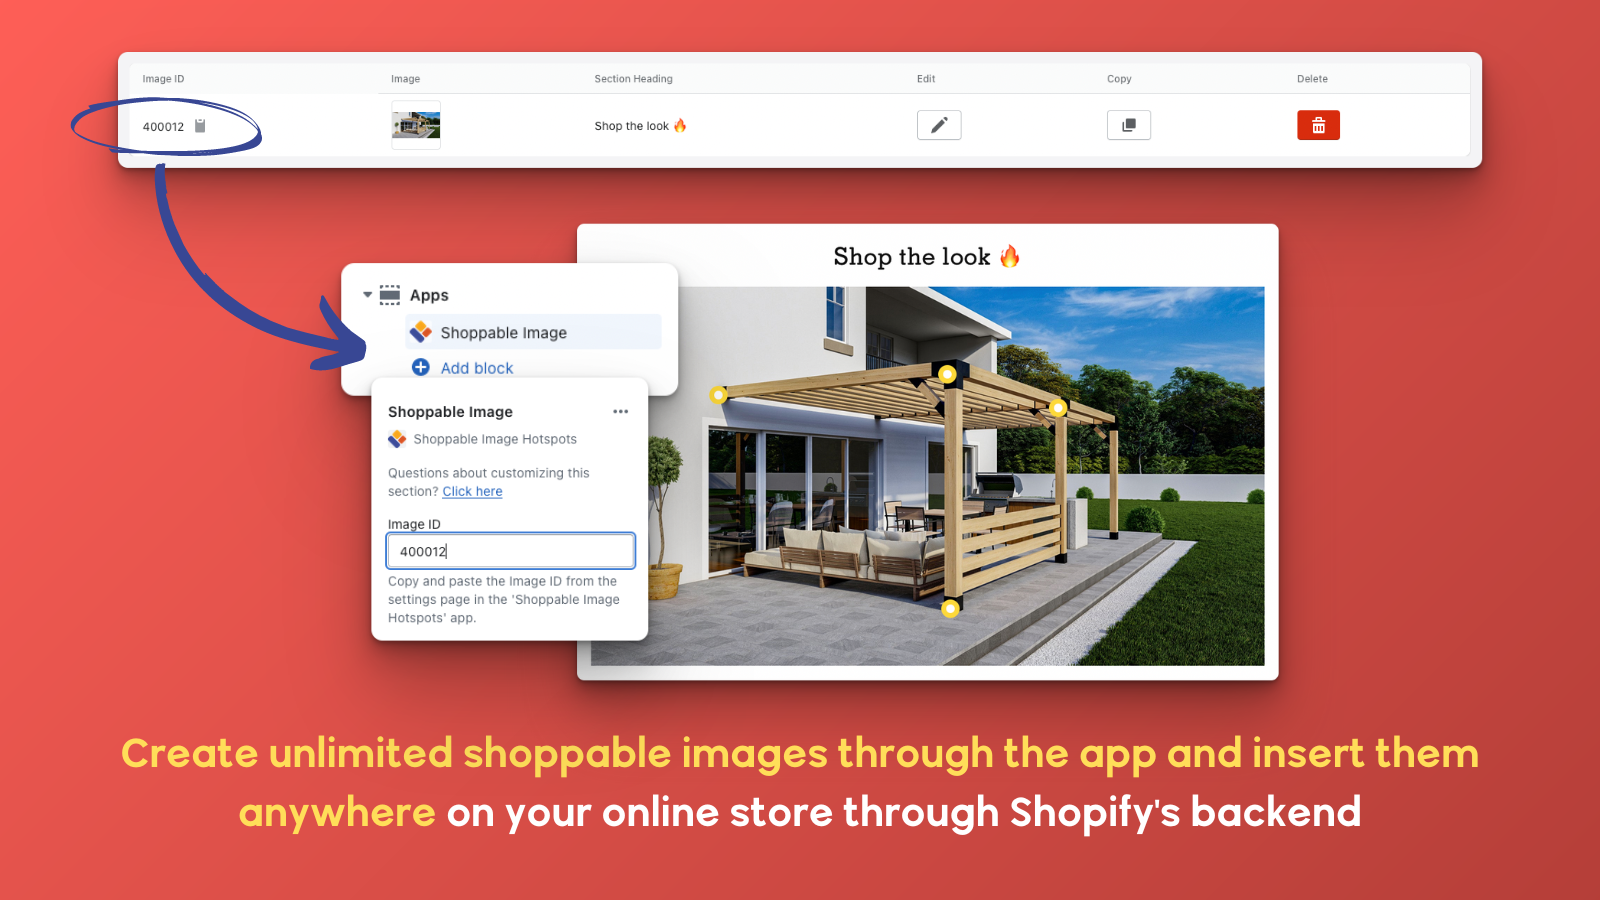 Insert an unlimited number of shoppable images into your store